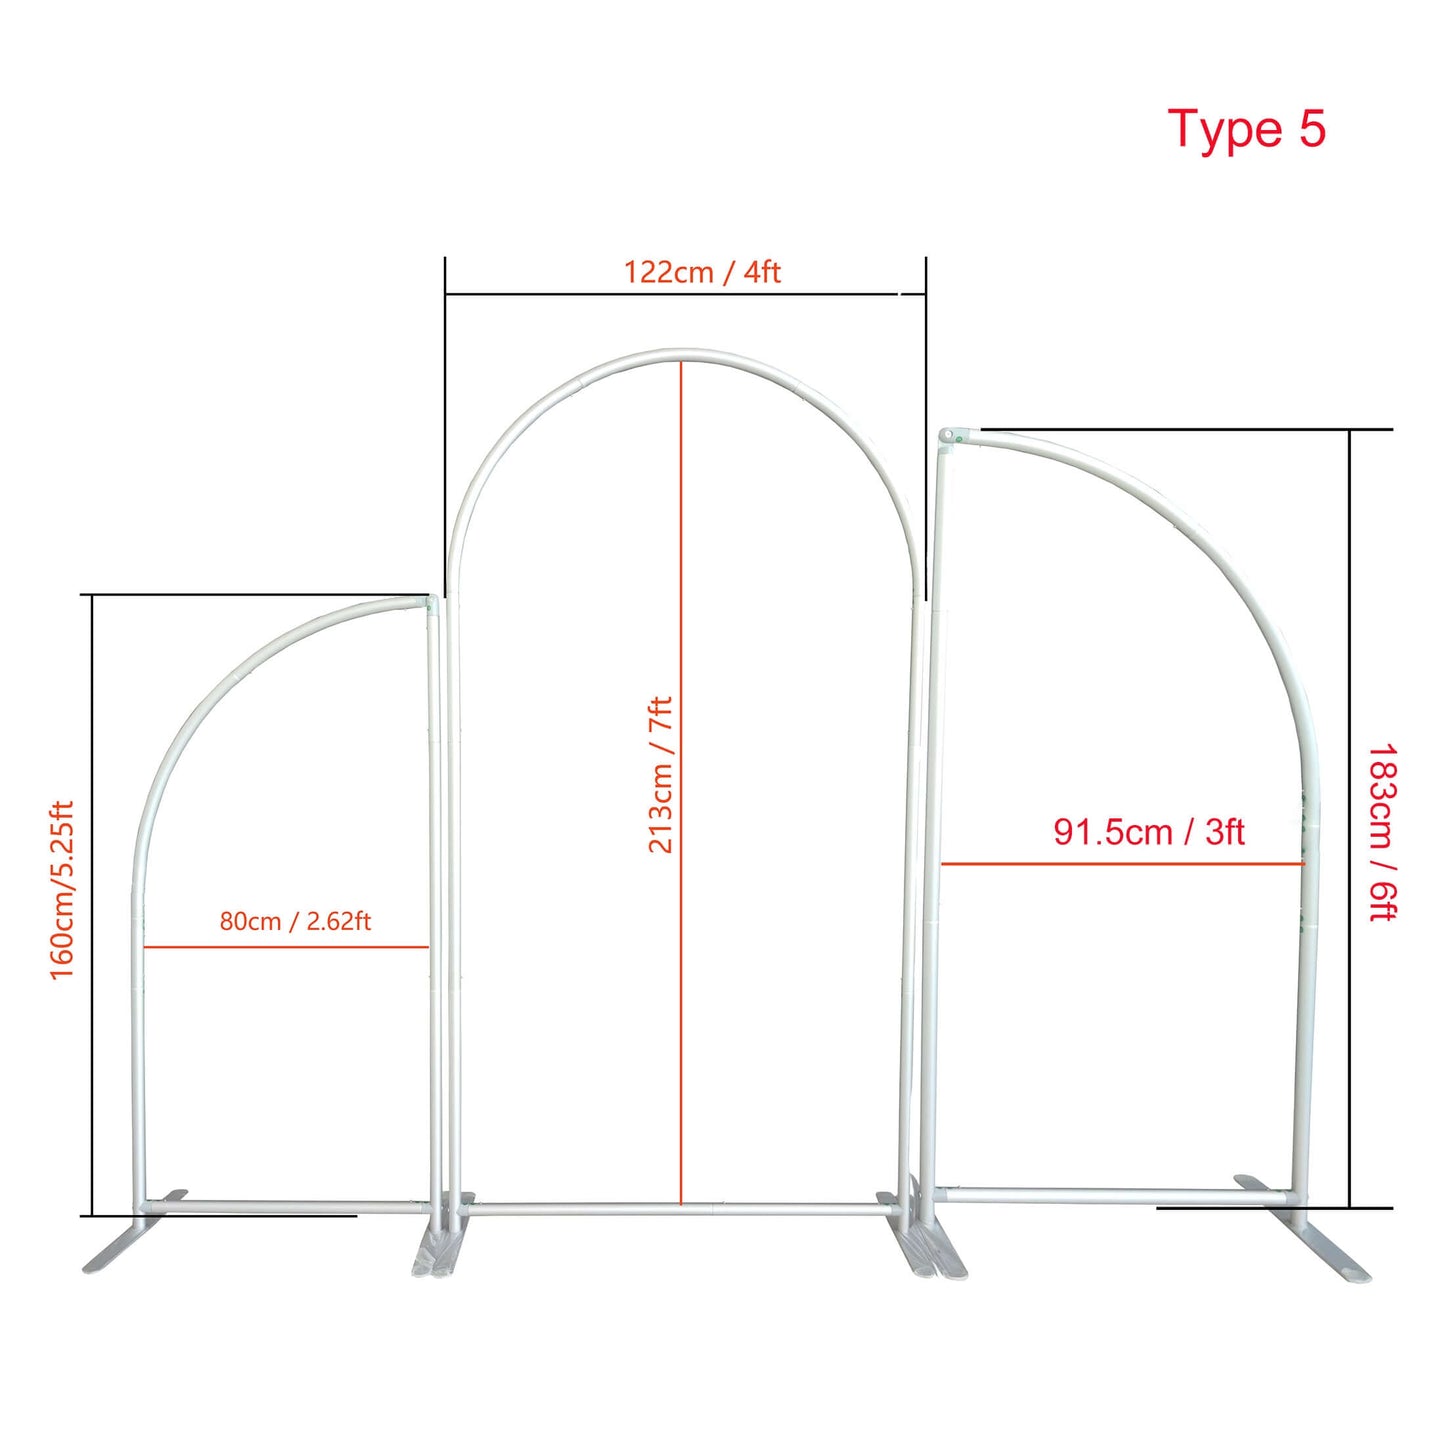 Chiara Arch Stand Frames 5X7Ft Open 3X4Ft 4X7Ft 2.62X5.25Ft+4X7Ft+3X6Ft Stands Feestachtergrond